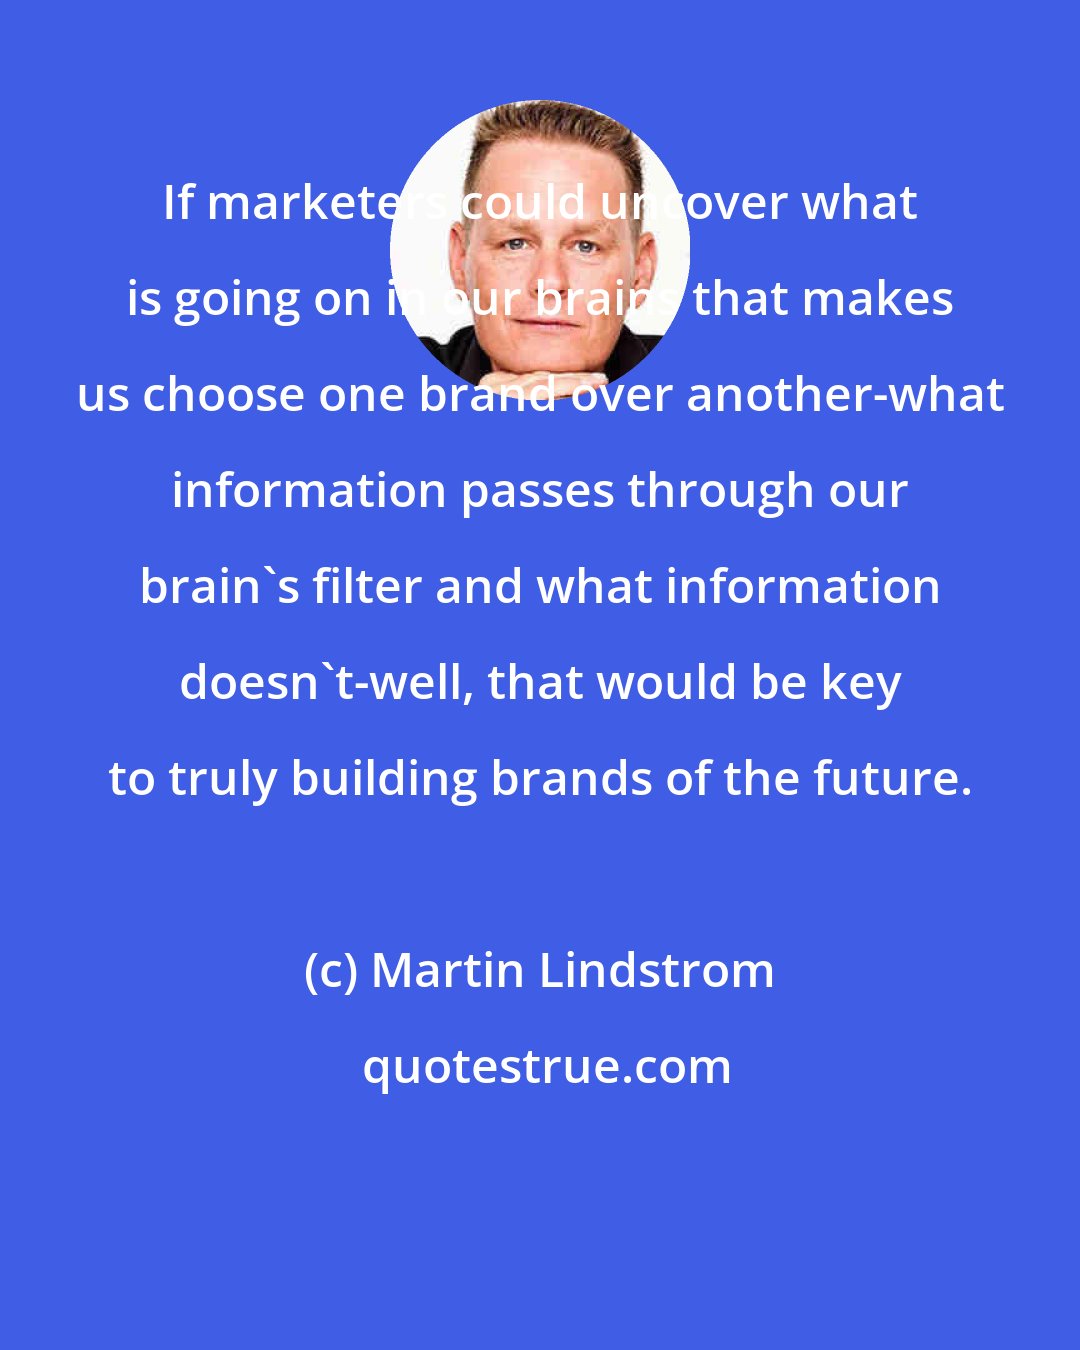 Martin Lindstrom: If marketers could uncover what is going on in our brains that makes us choose one brand over another-what information passes through our brain's filter and what information doesn't-well, that would be key to truly building brands of the future.